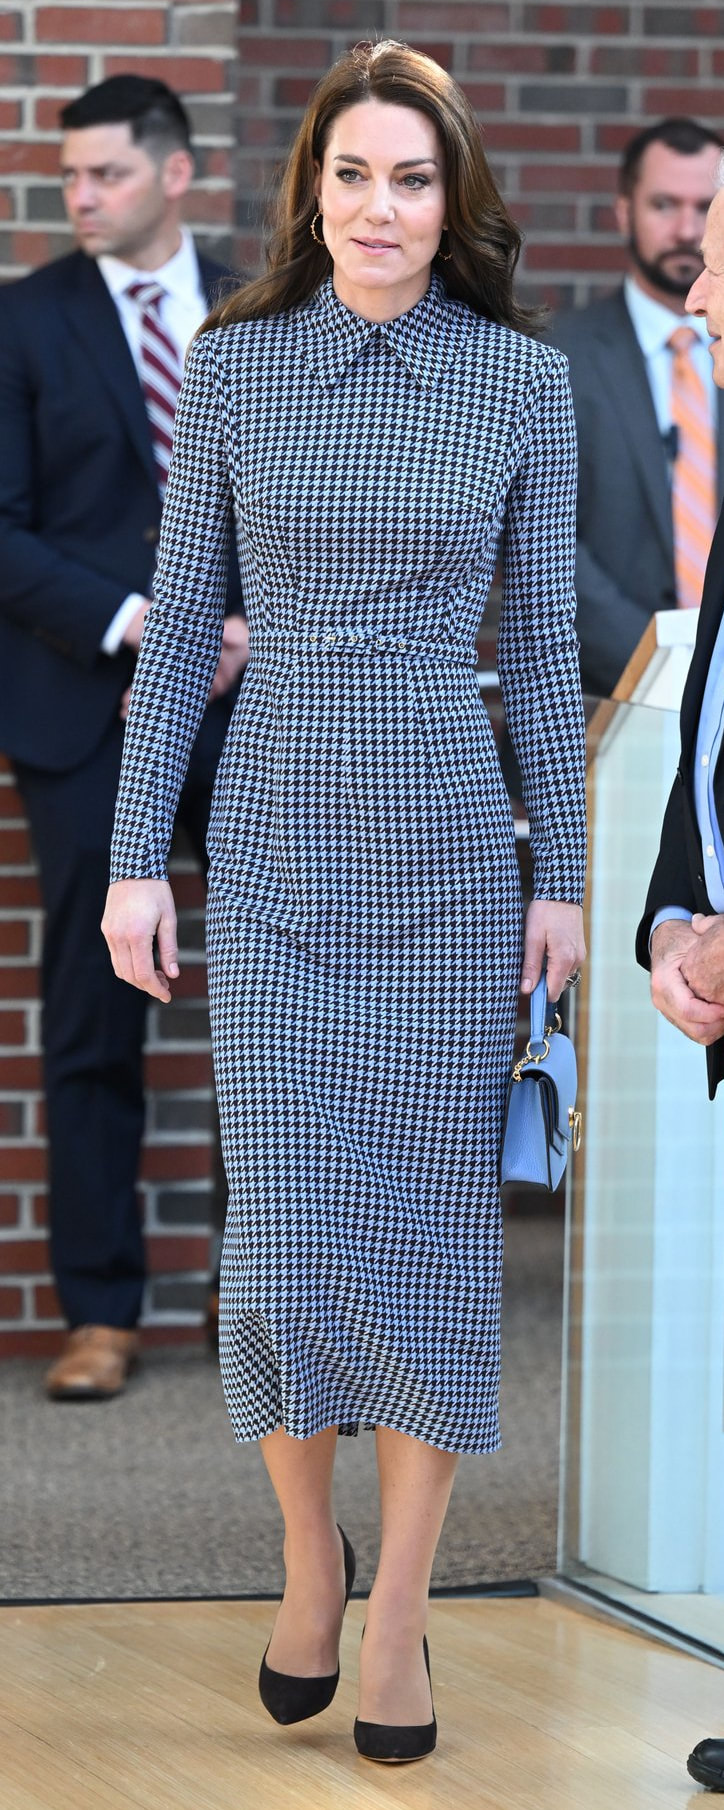 Emilia Wickstead 'Miles' Houndstooth Dress as seen on Kate Middleton, Princess of Wales.